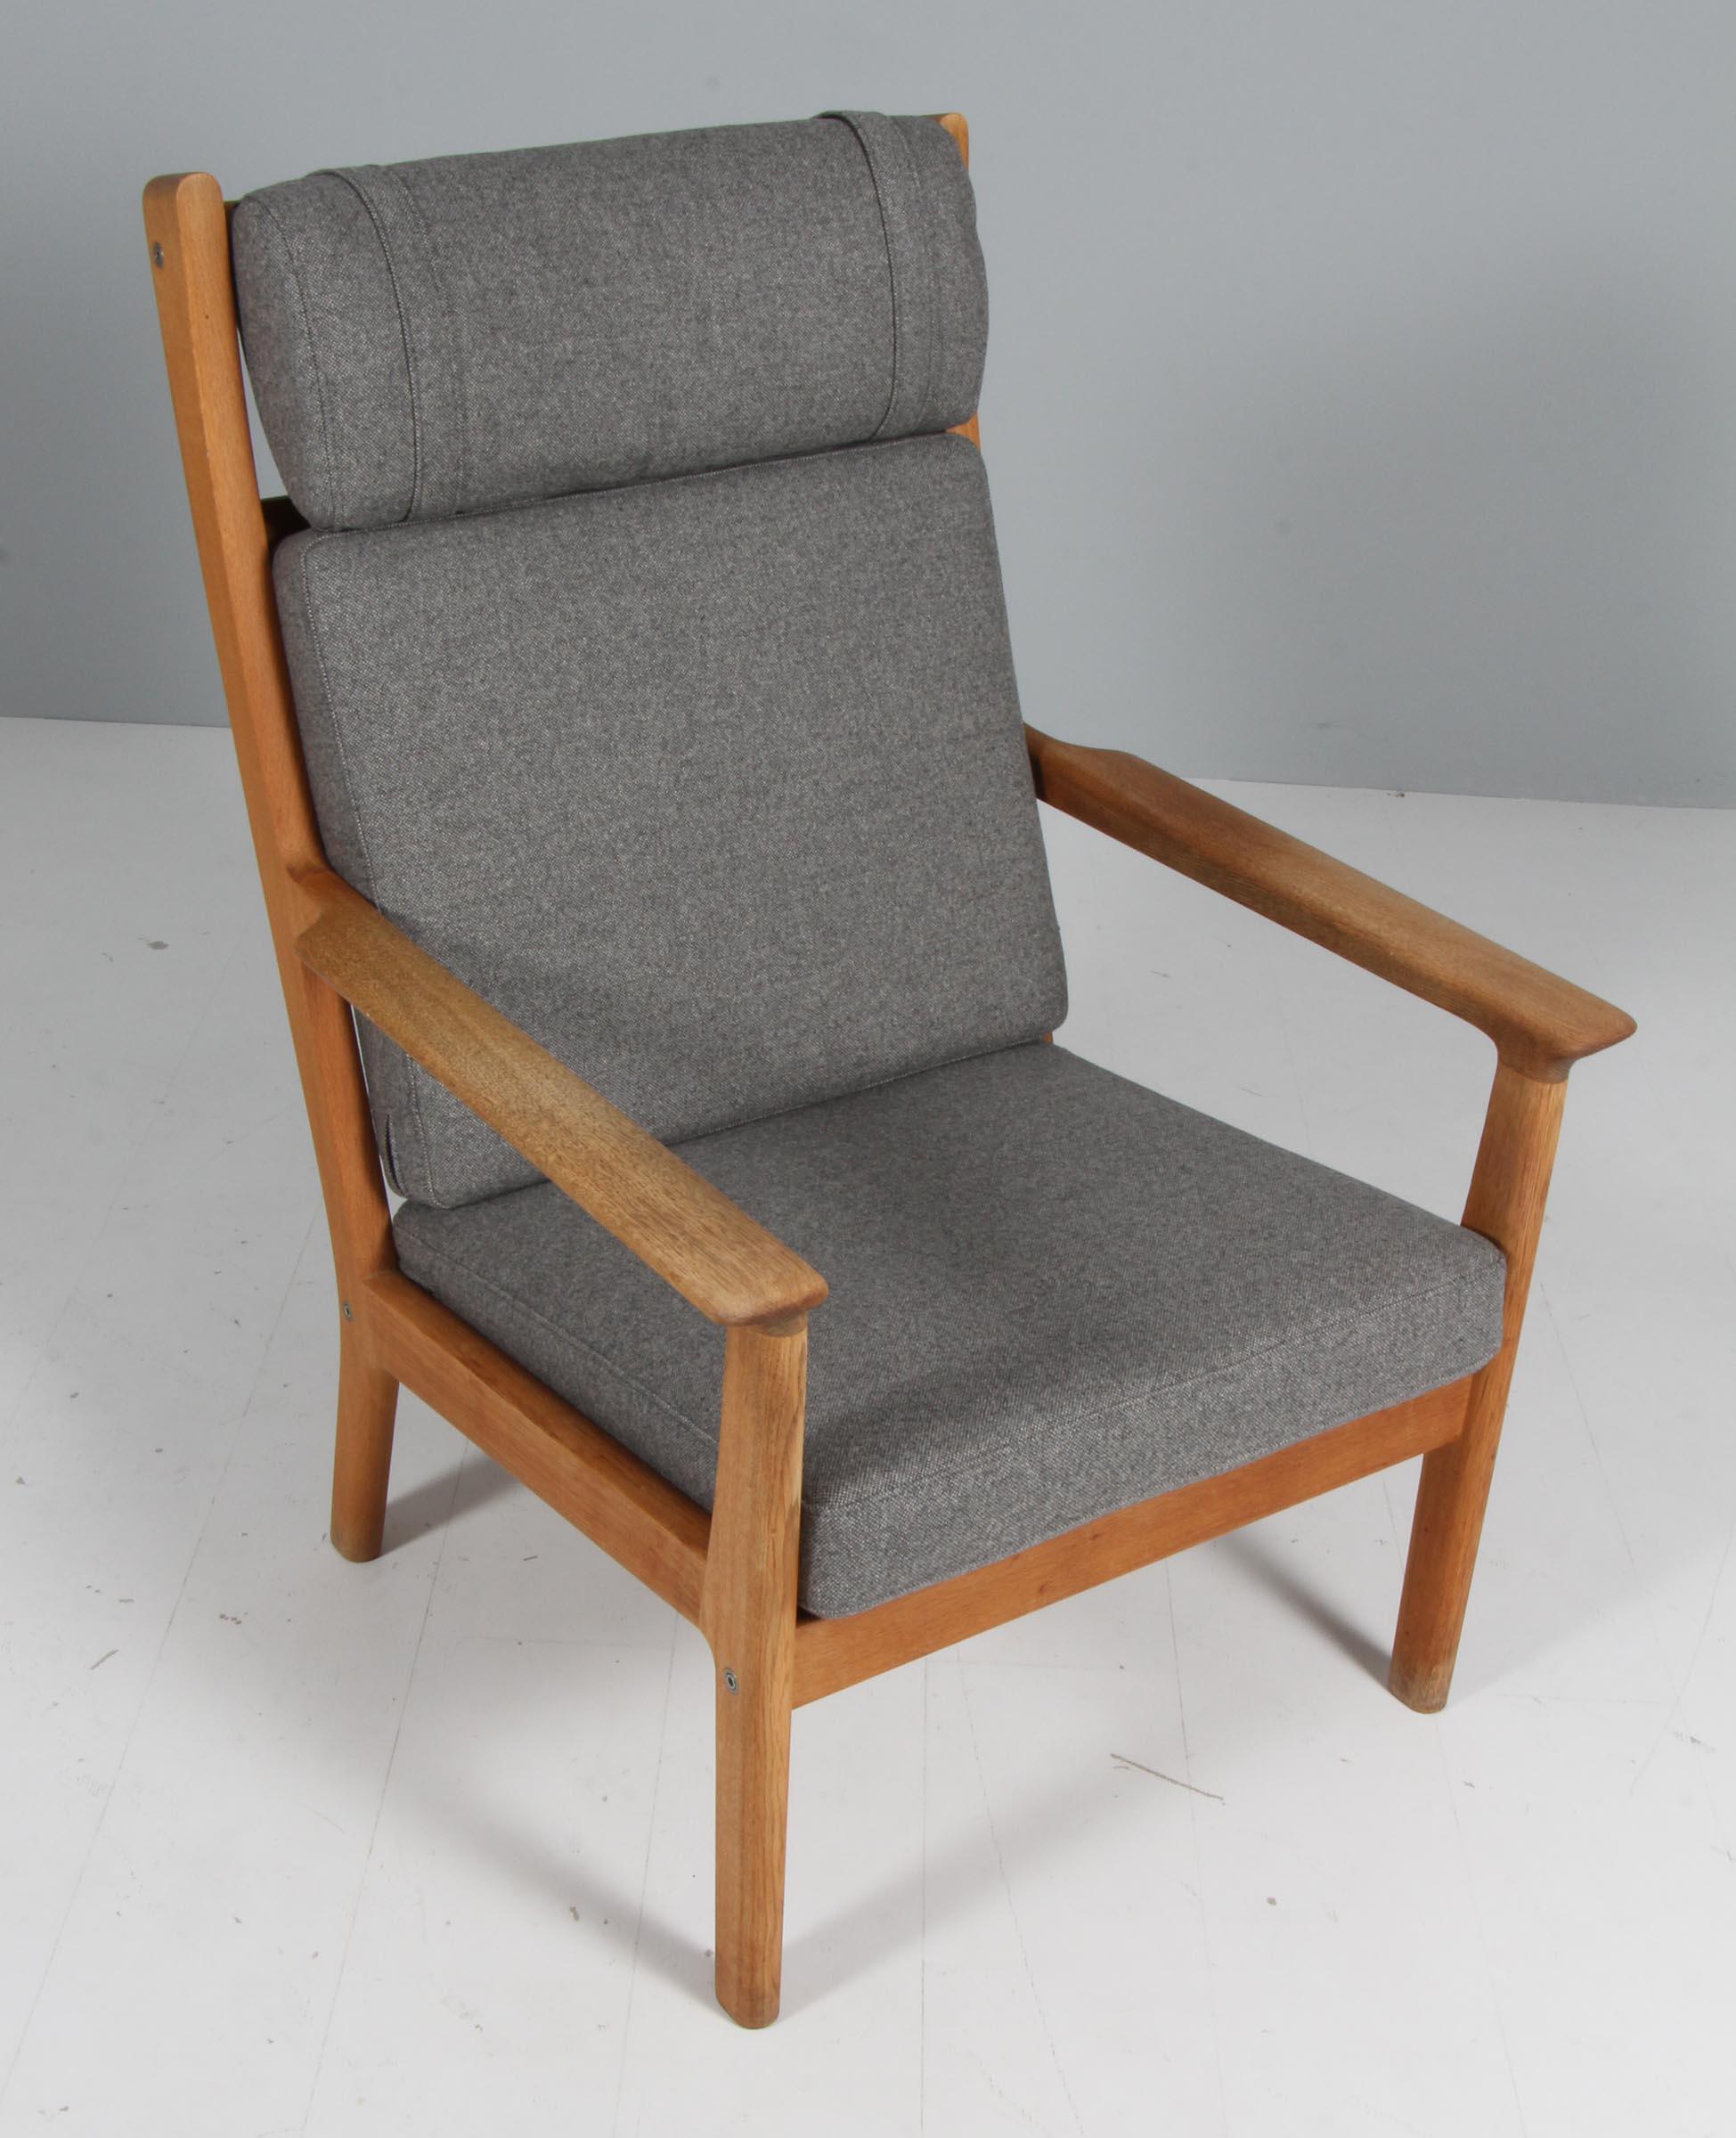 Hans J. Wegner highback lounge chair in solid oak. 

New upholstered with Magrethe wool from Nevotex.

Model GE265, made by Getama.